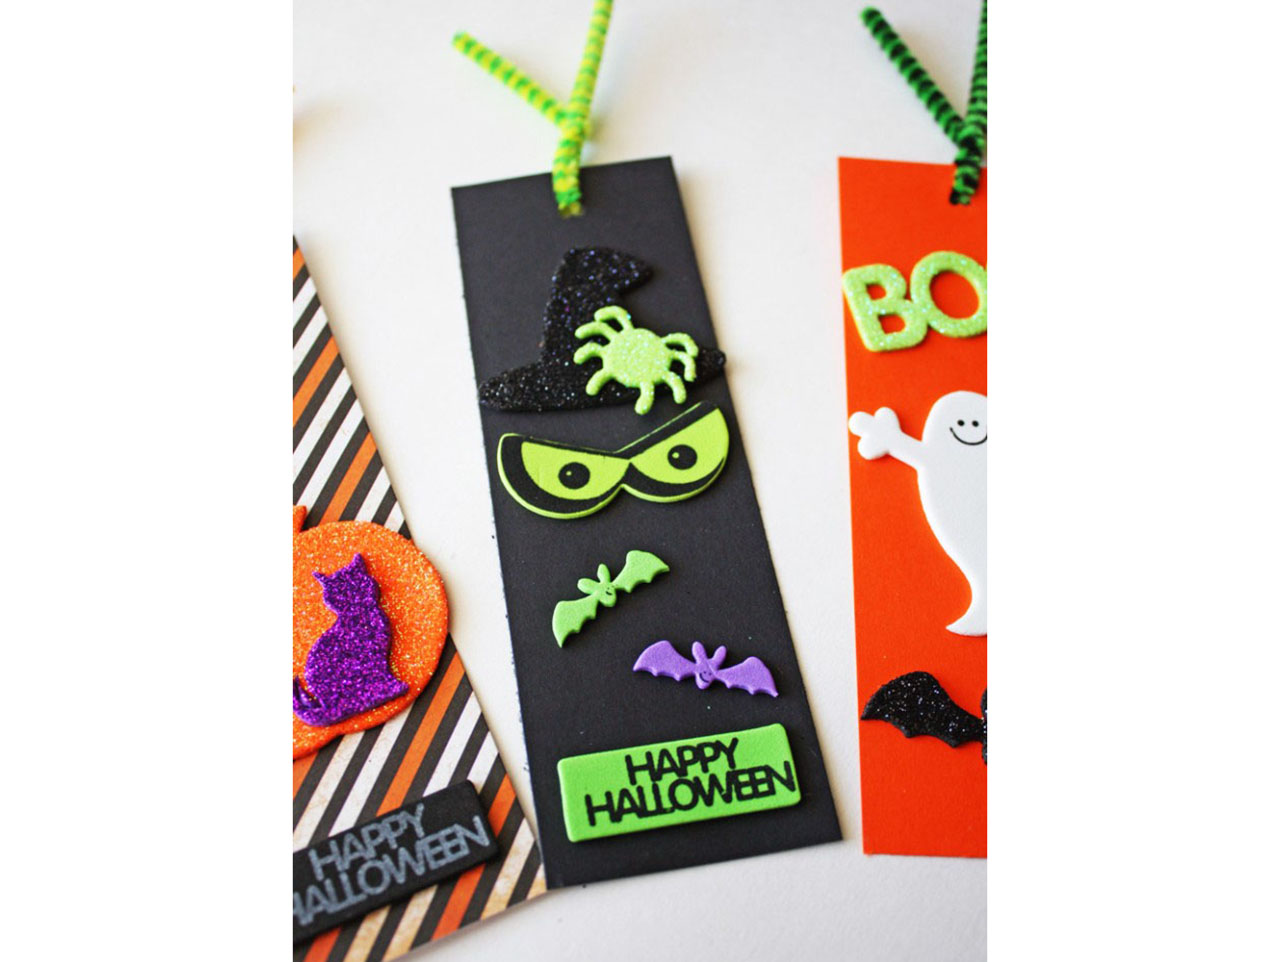 Halloween Bookmarks, Personalized Bookmarks